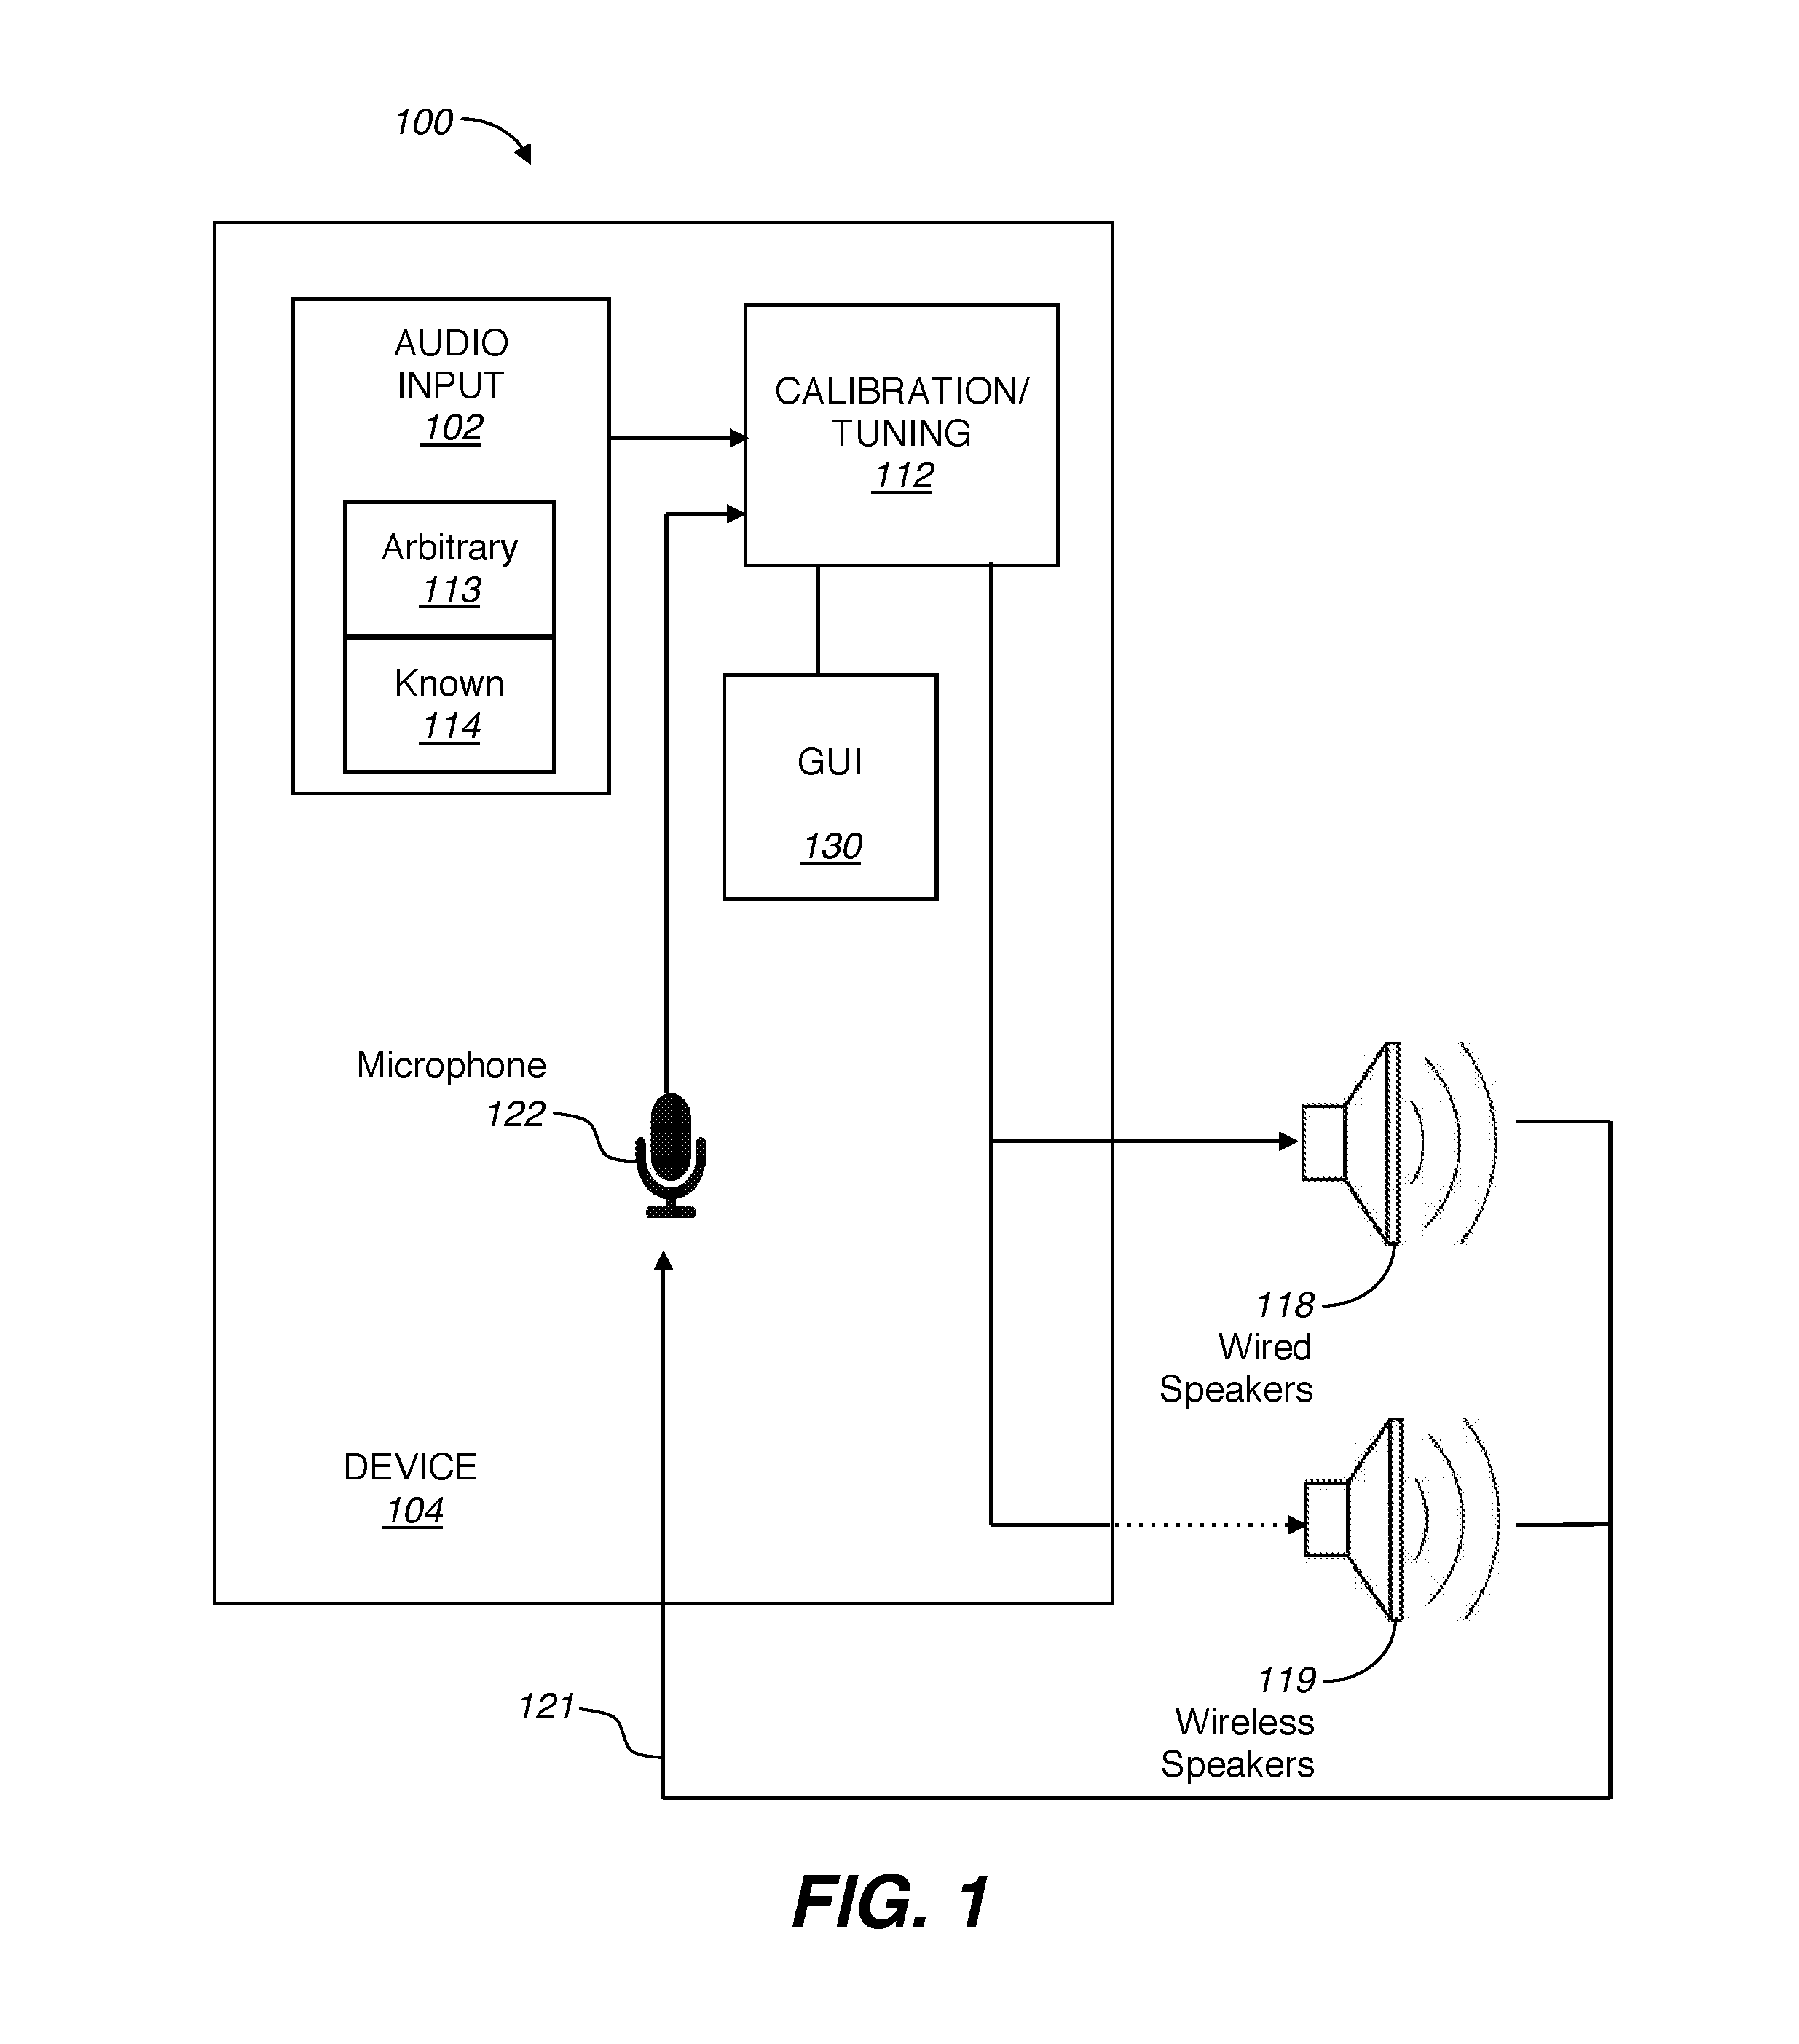 System and Method to Enhance Speakers Connected to Devices with Microphones